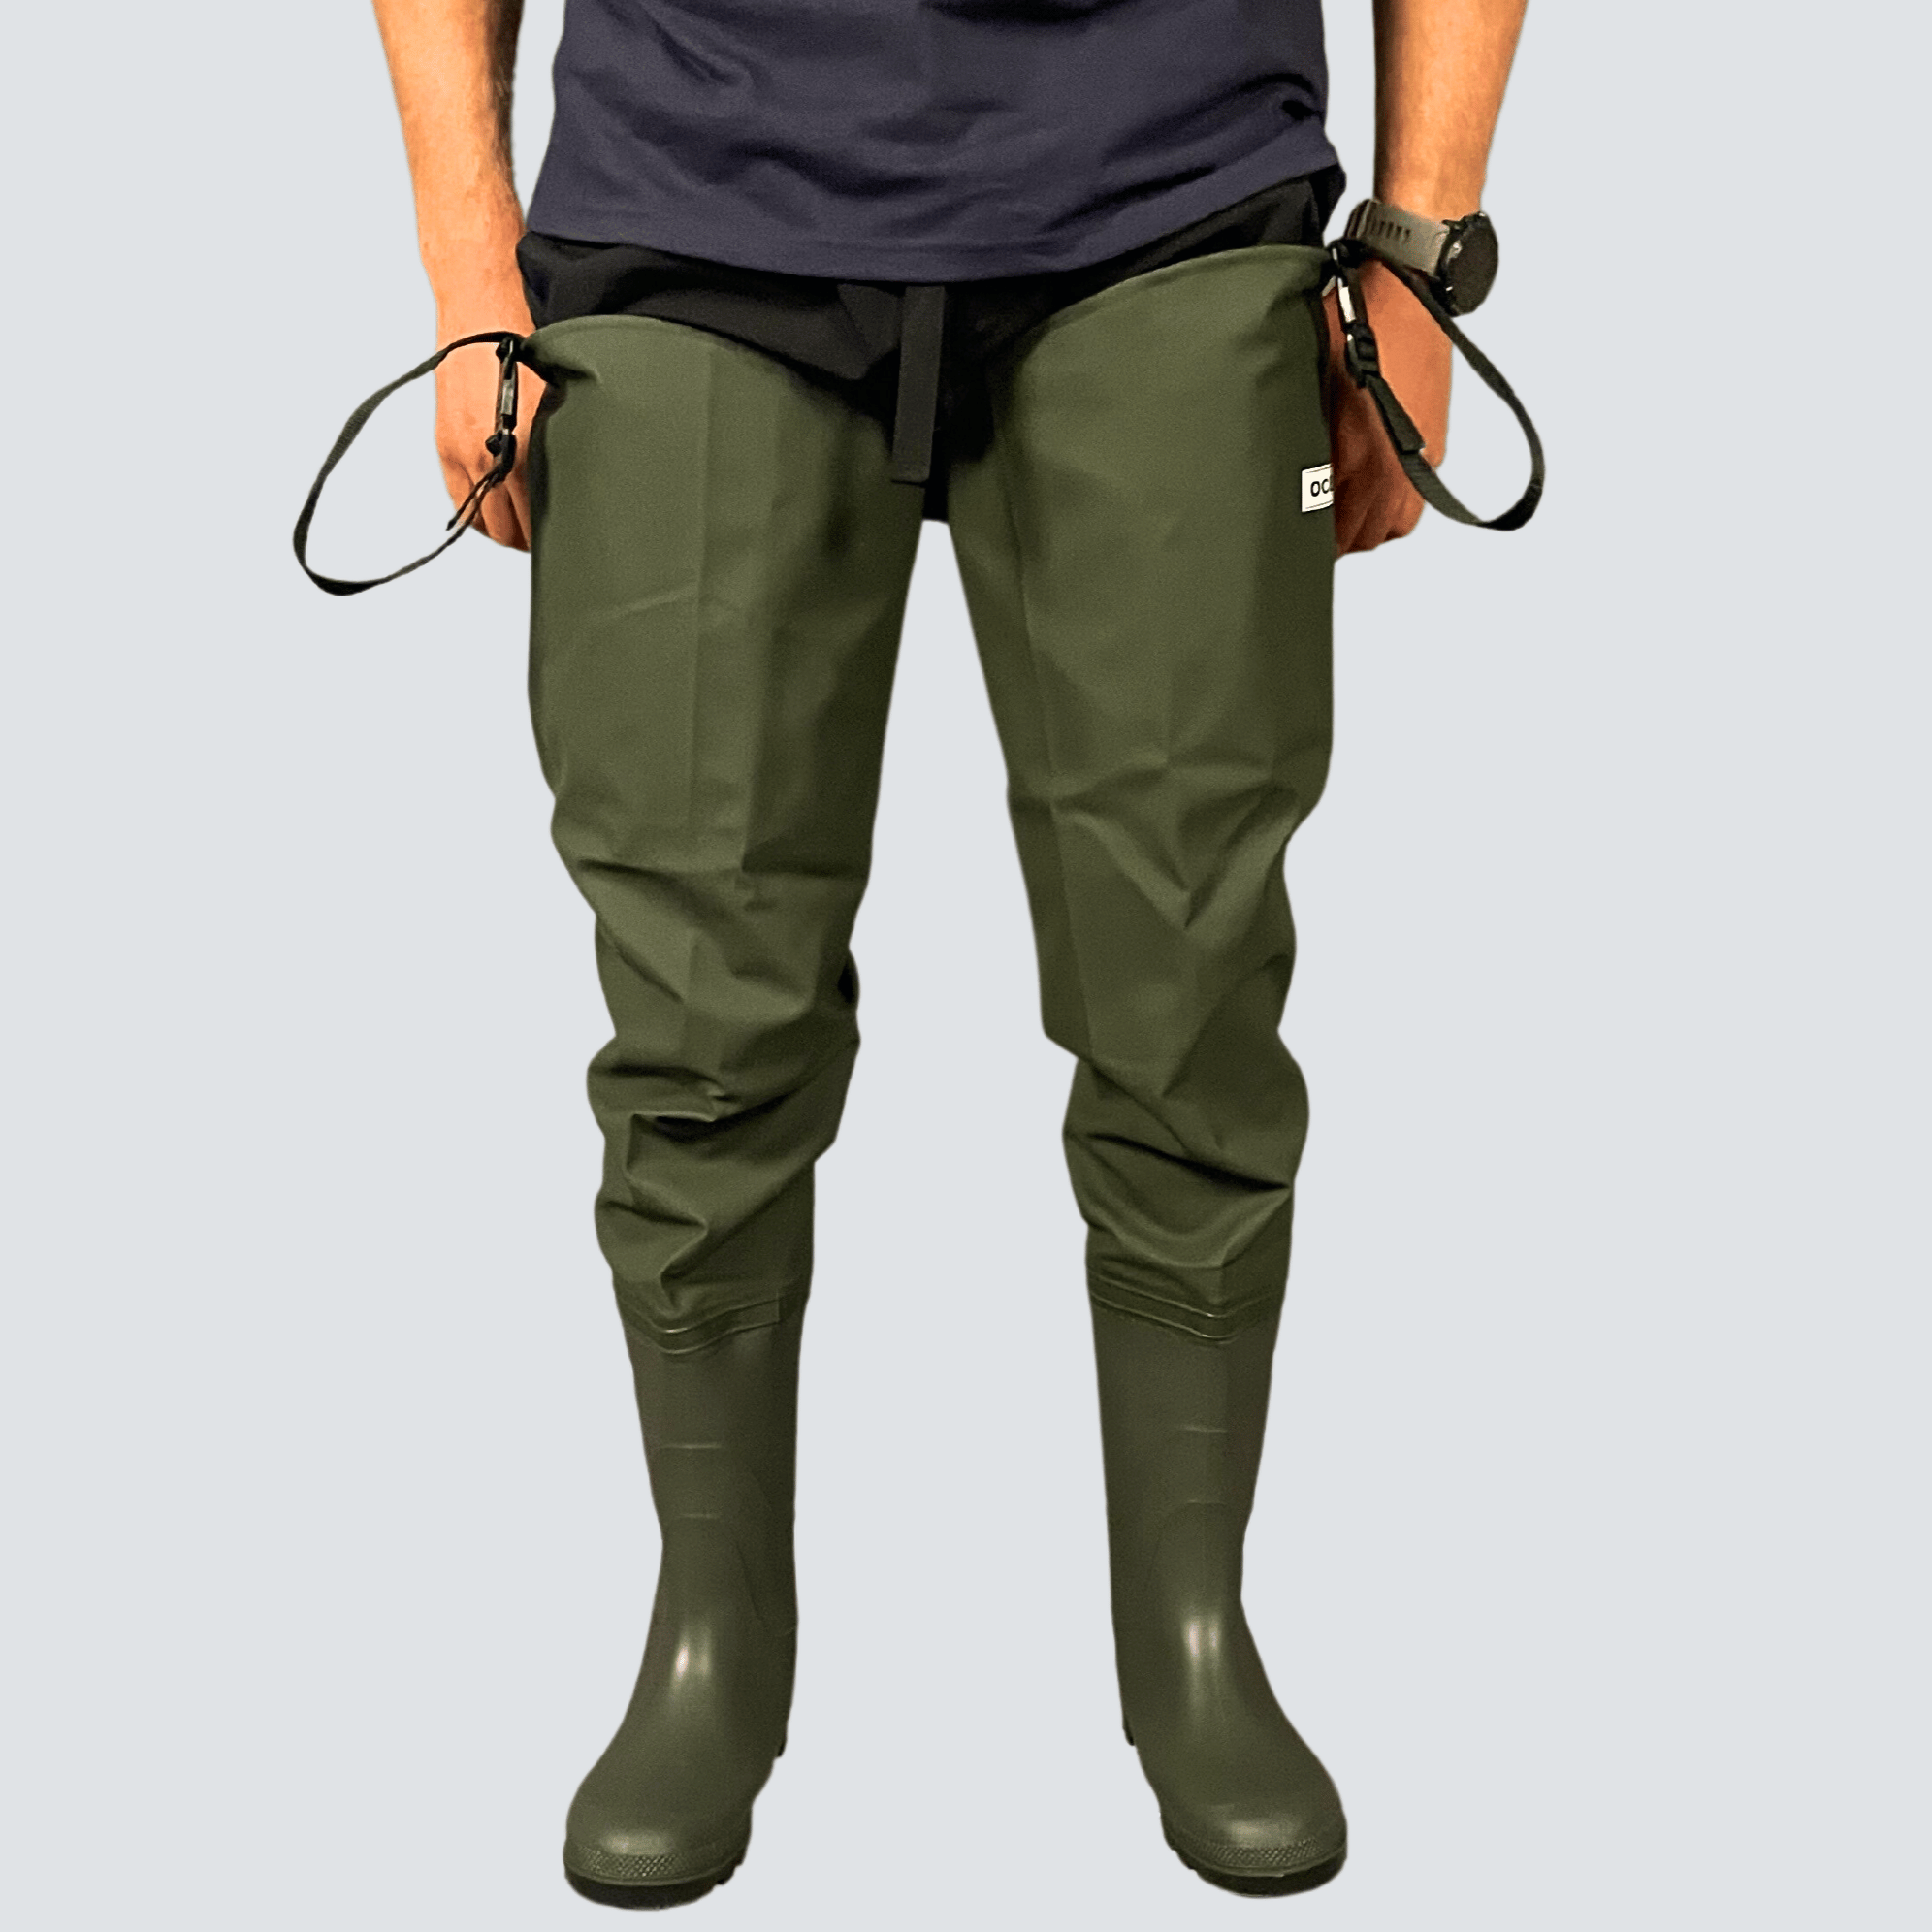 Deluxe W. S5 Thigh Waders